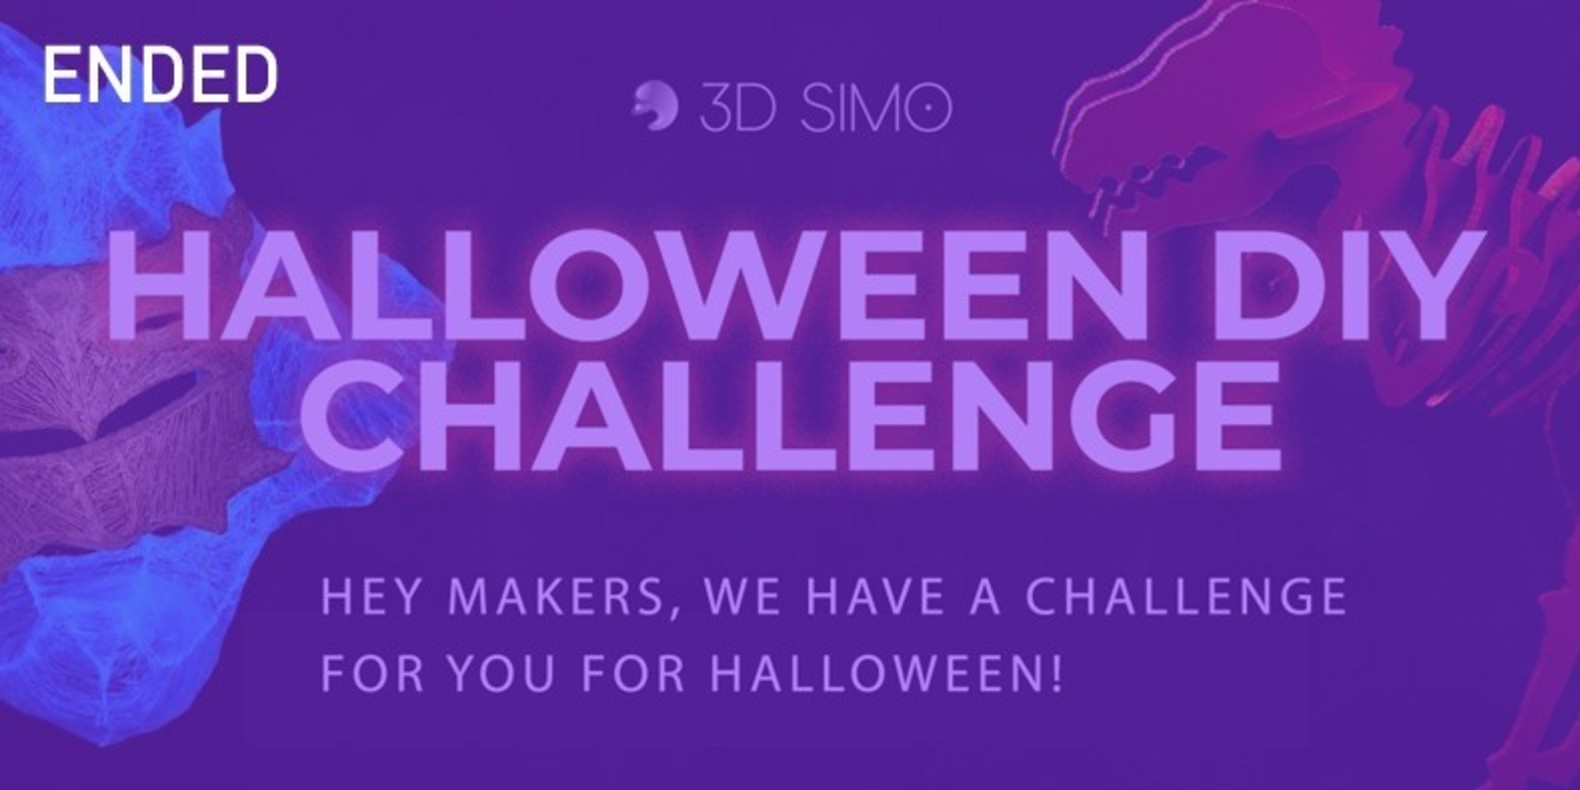 Hey makers, Halloween is near and we’ve got challenge for you!